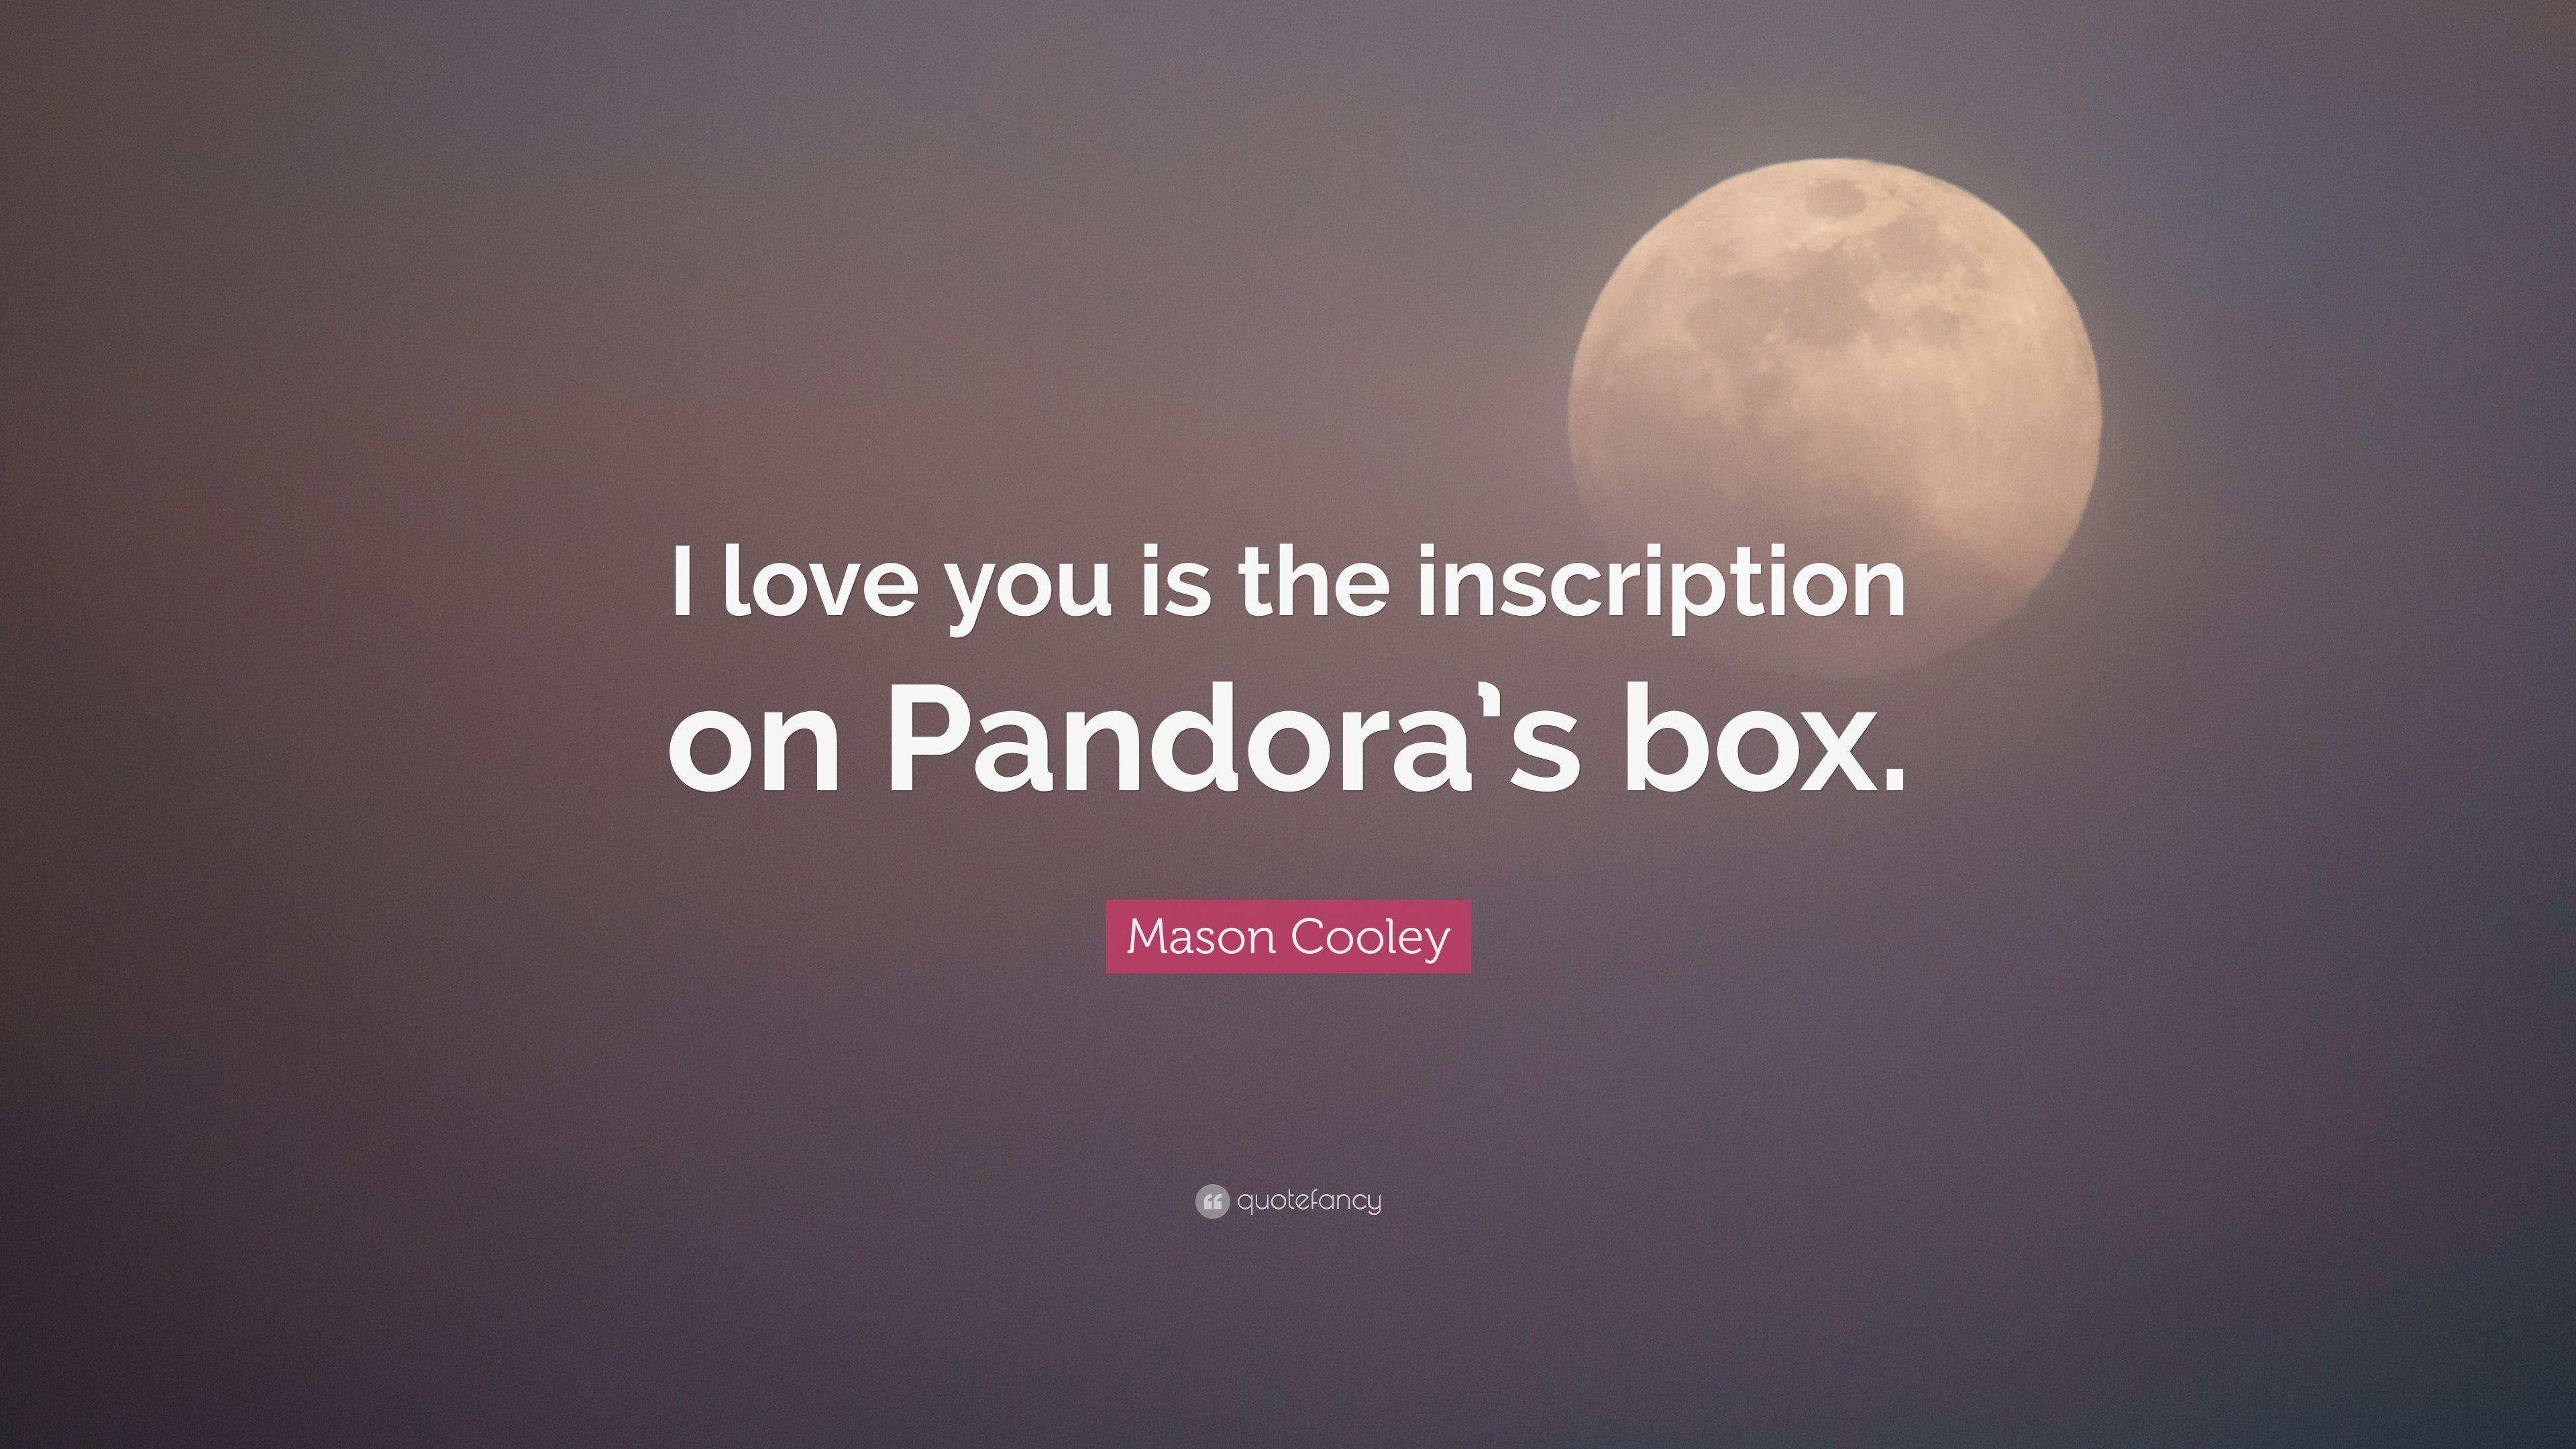 Mason Cooley Quote: “I love you is the inscription